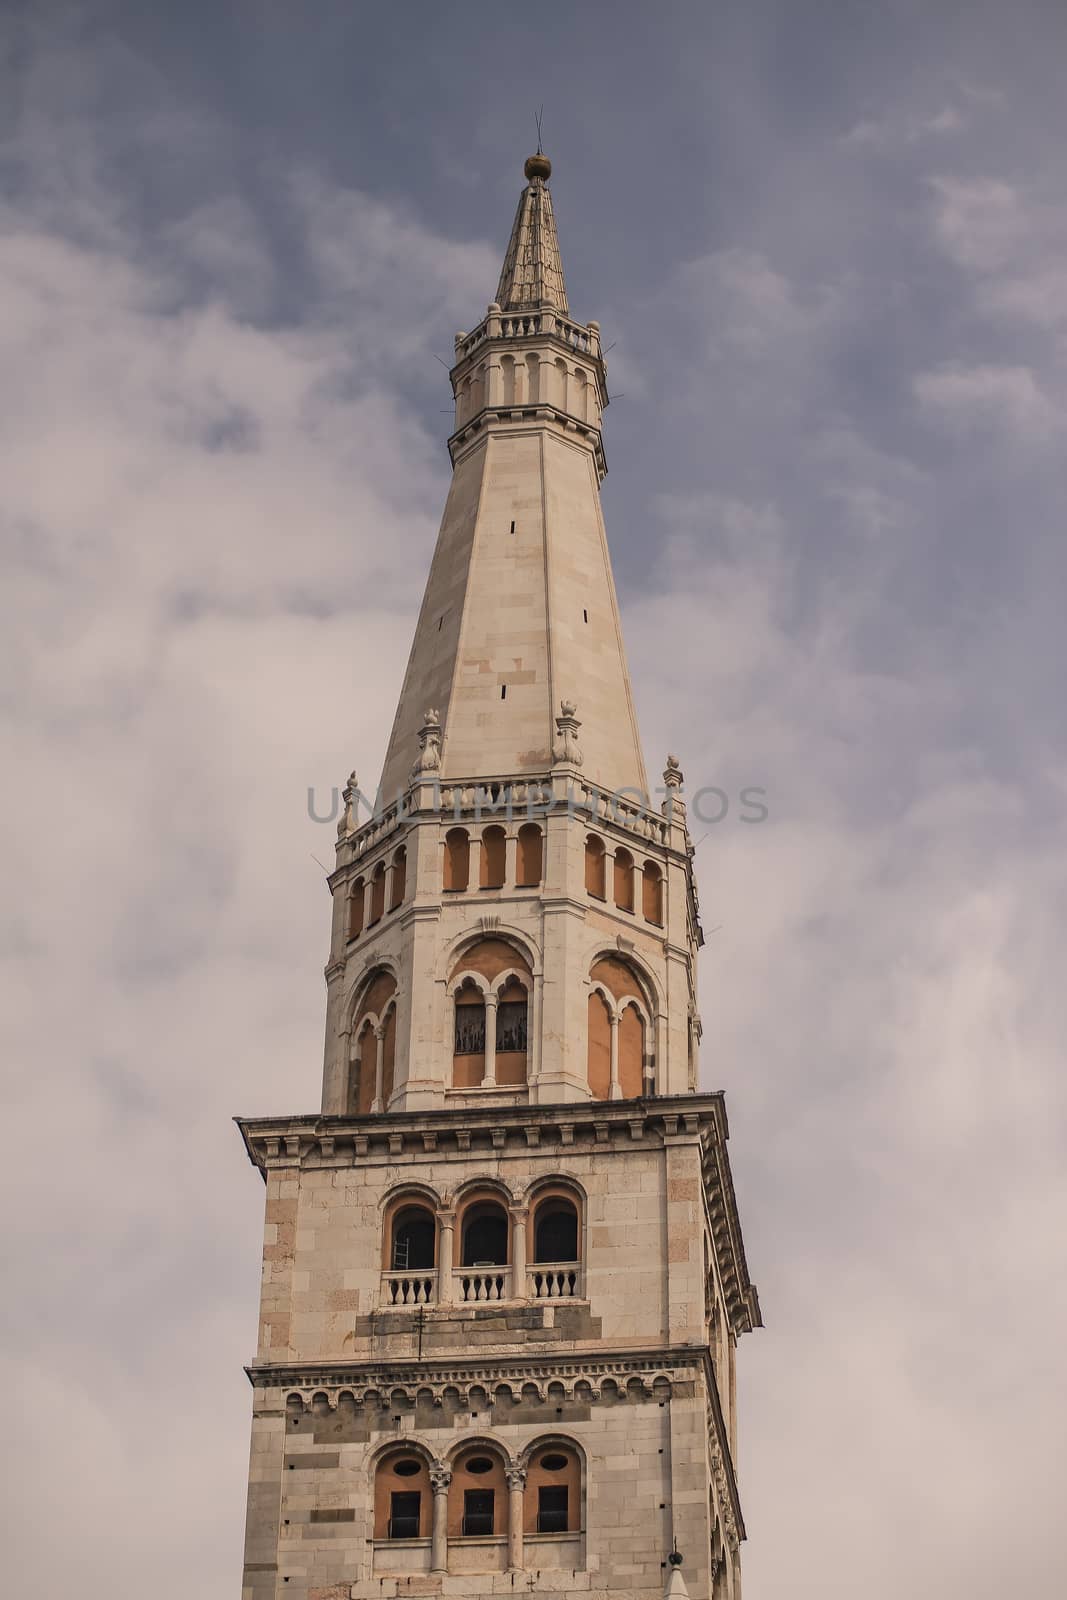 Ghirlandina tower in Modena, Italy 4 by pippocarlot